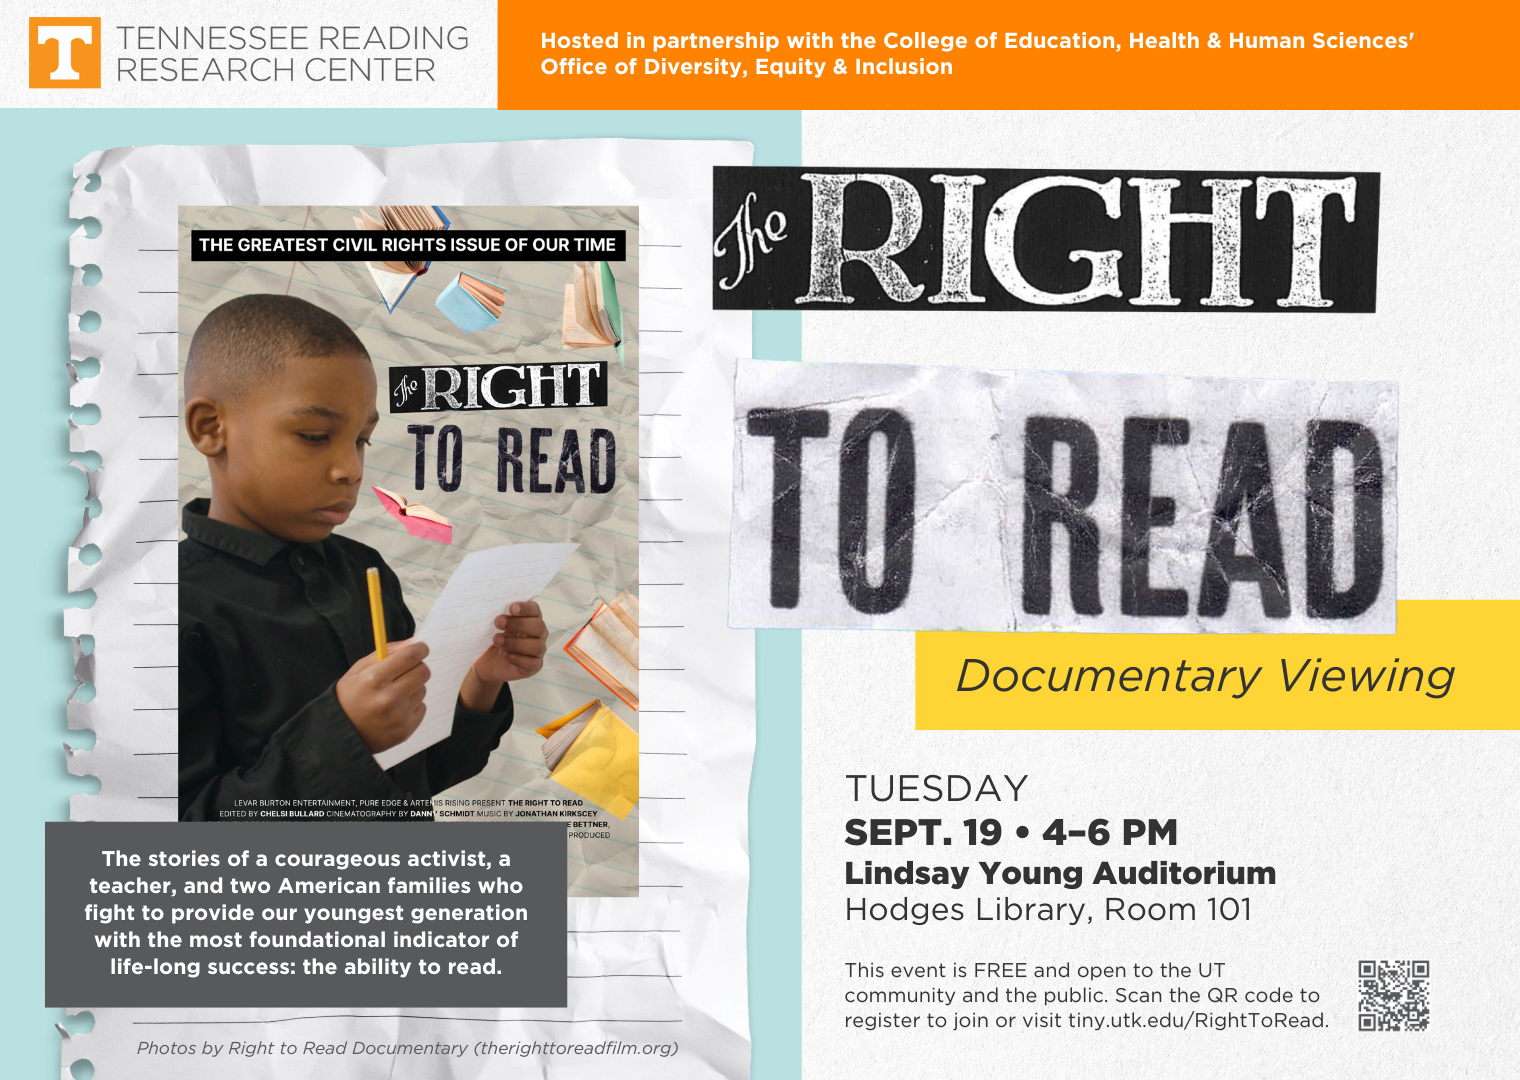 Advertisement of the documentary screening of "The Right to Read" on the campus of the University of Tennessee, Knoxville. In partnership with the CEHHS DEI Team.